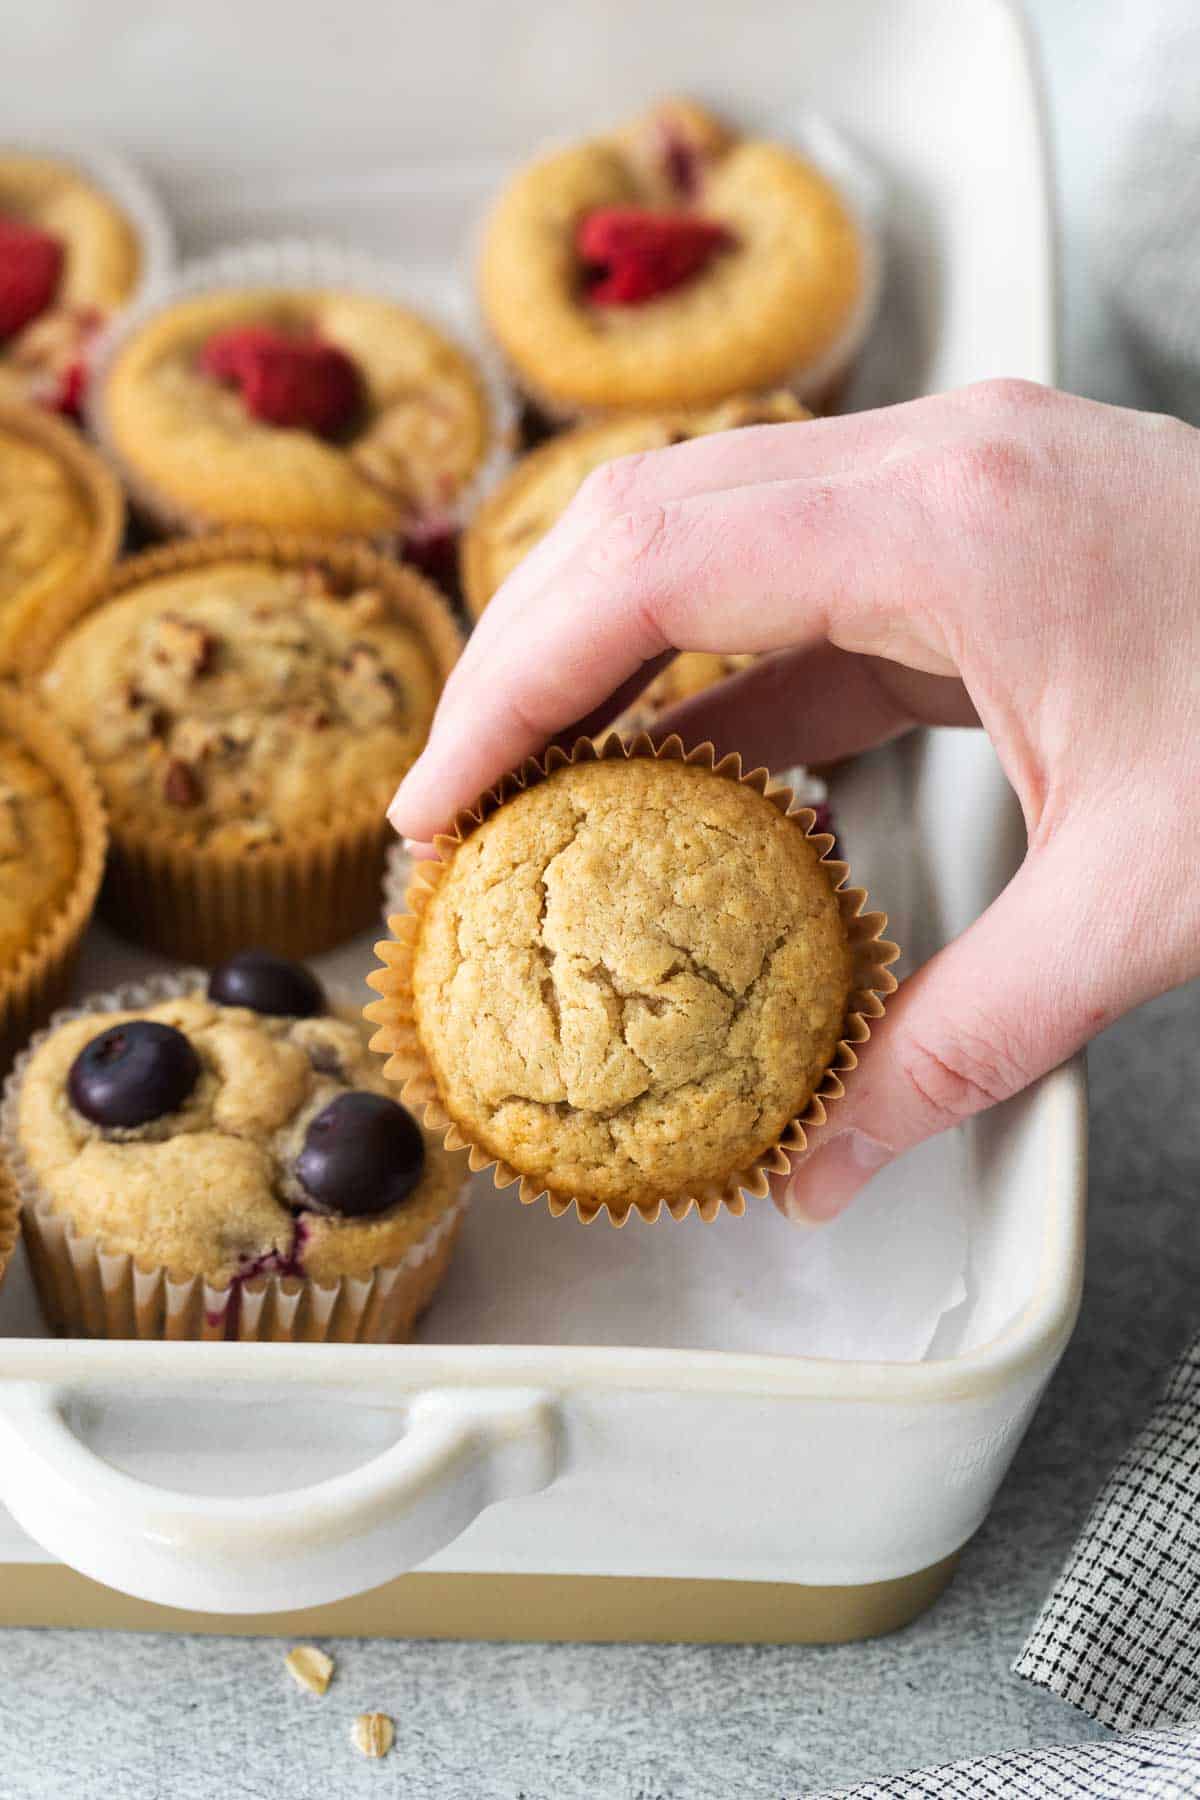 A hand reaching for a oat flour muffin in a baking dish